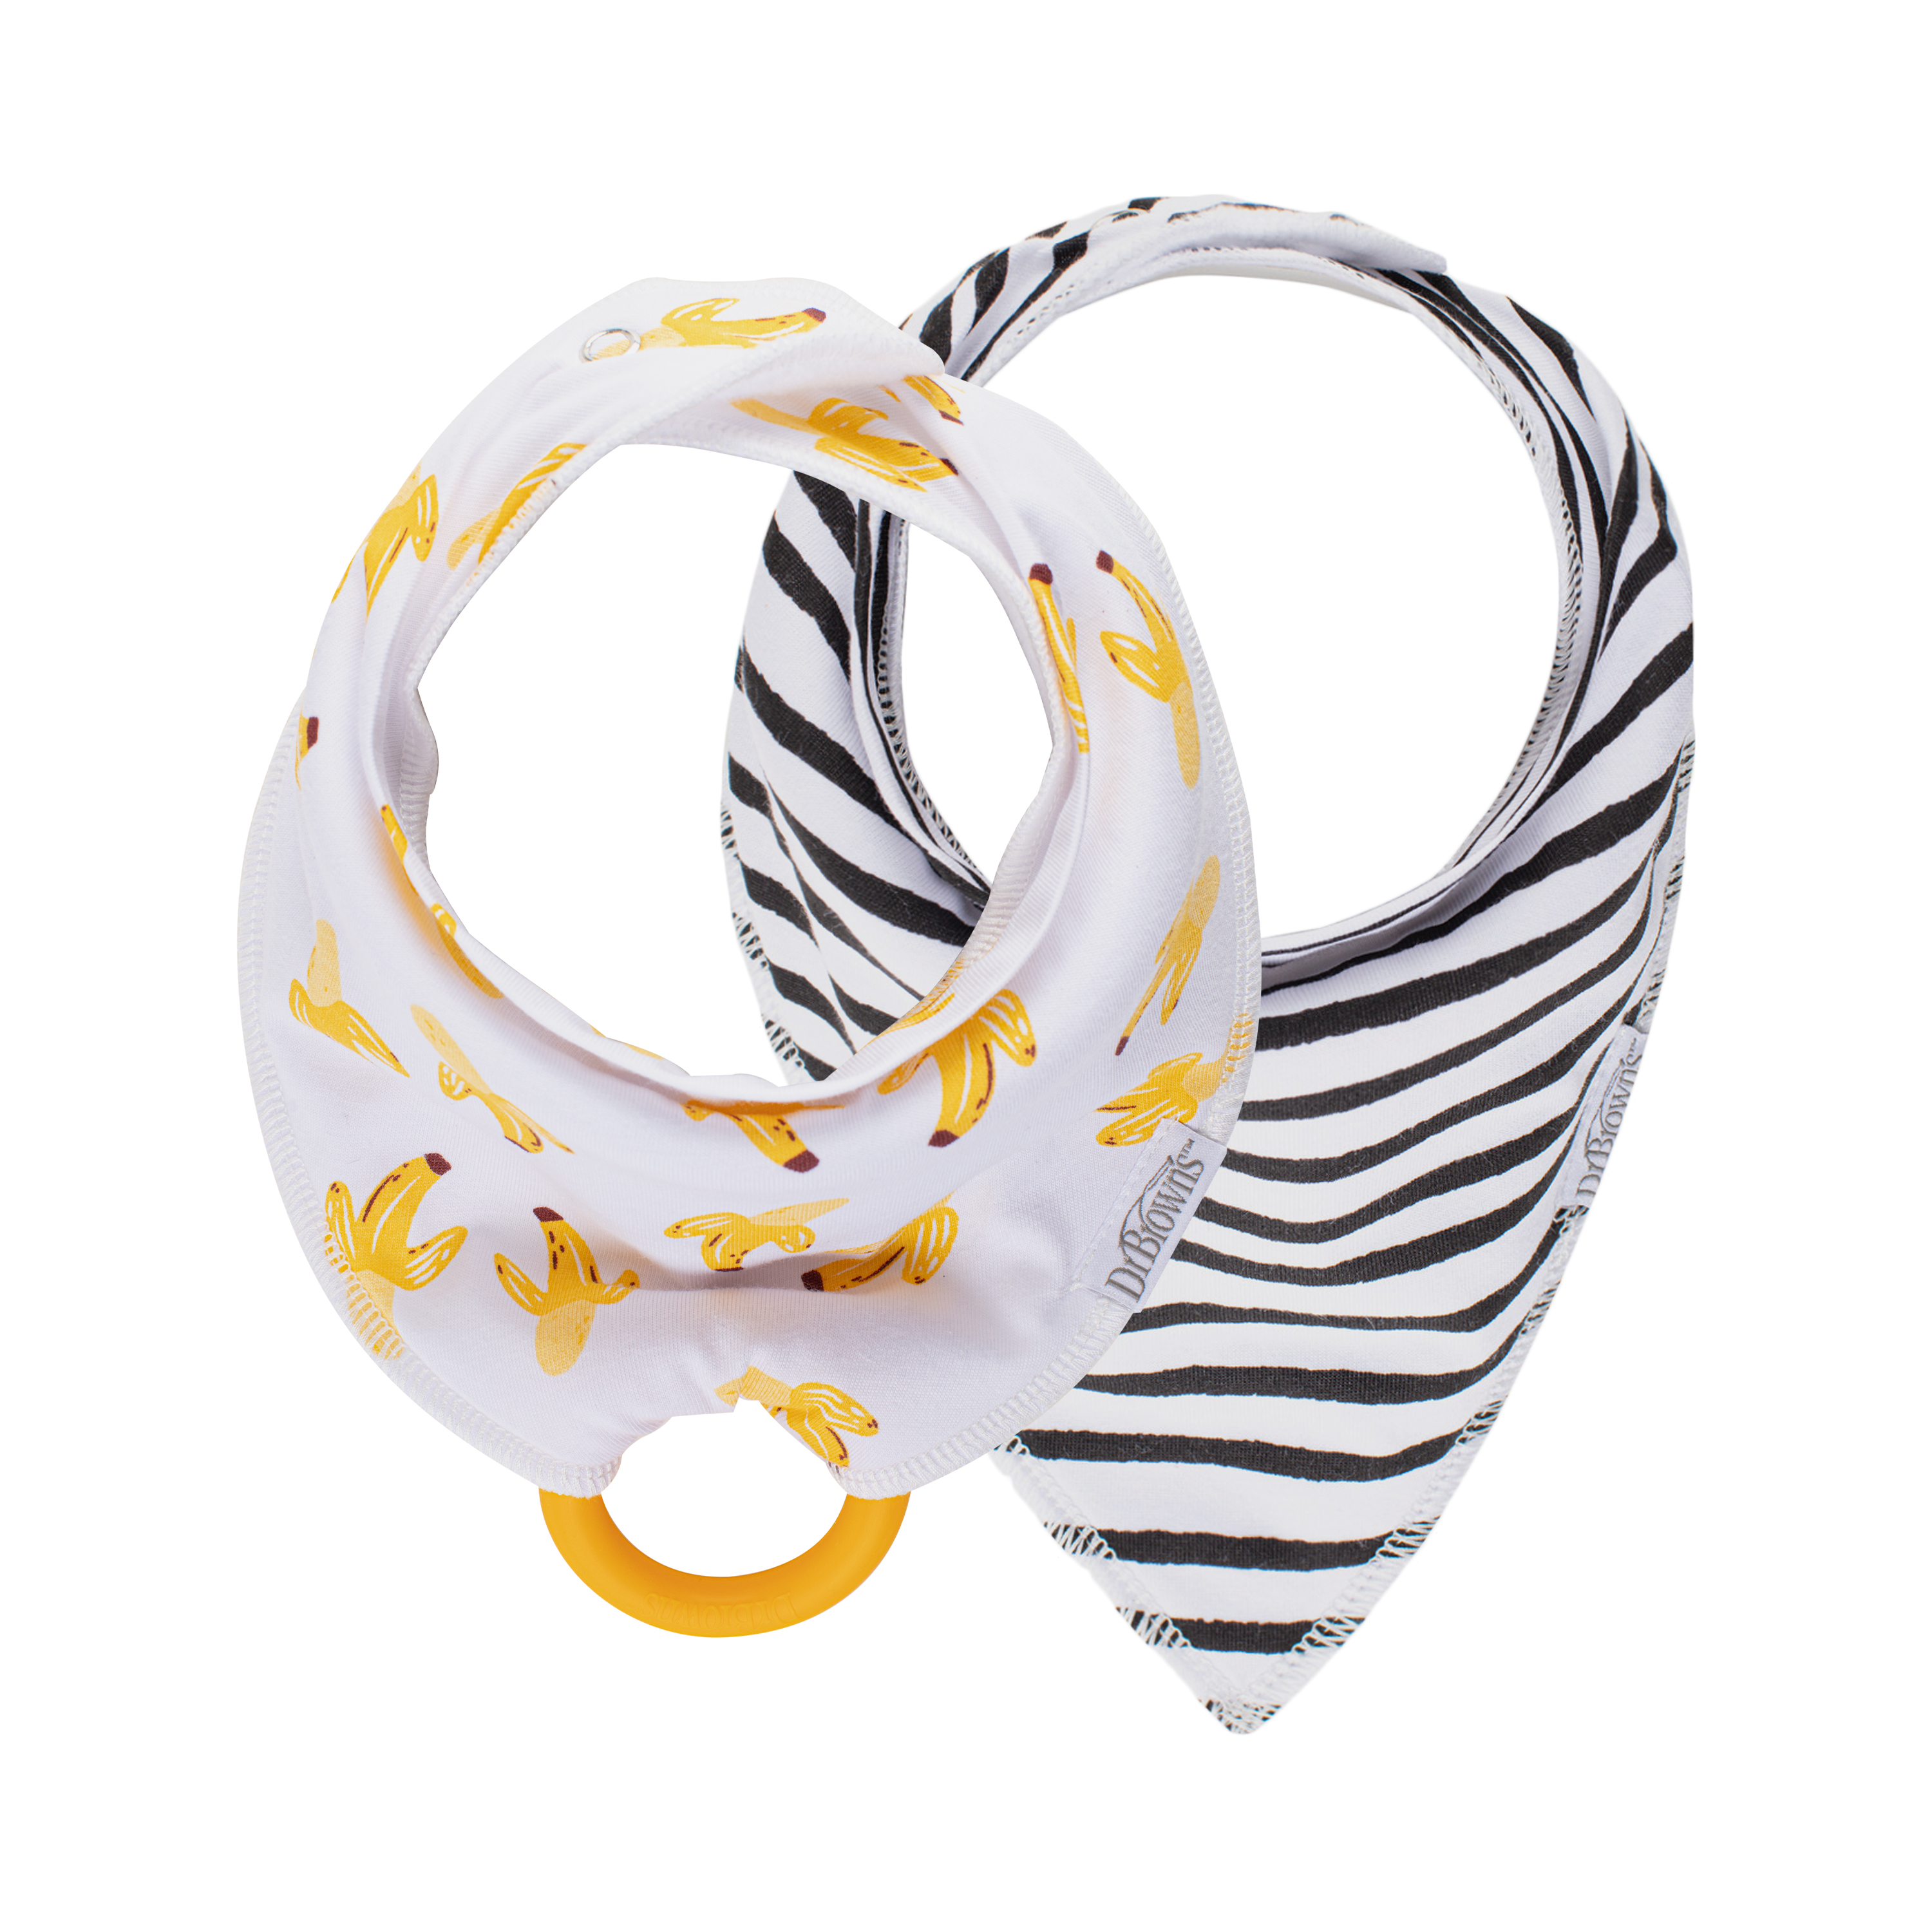 Dr. Brown's Bandana Bib with Snap-on Removable Teether, Black Stripes/Bananas, 3m+, 1 Size, 2 Pack - image 2 of 16